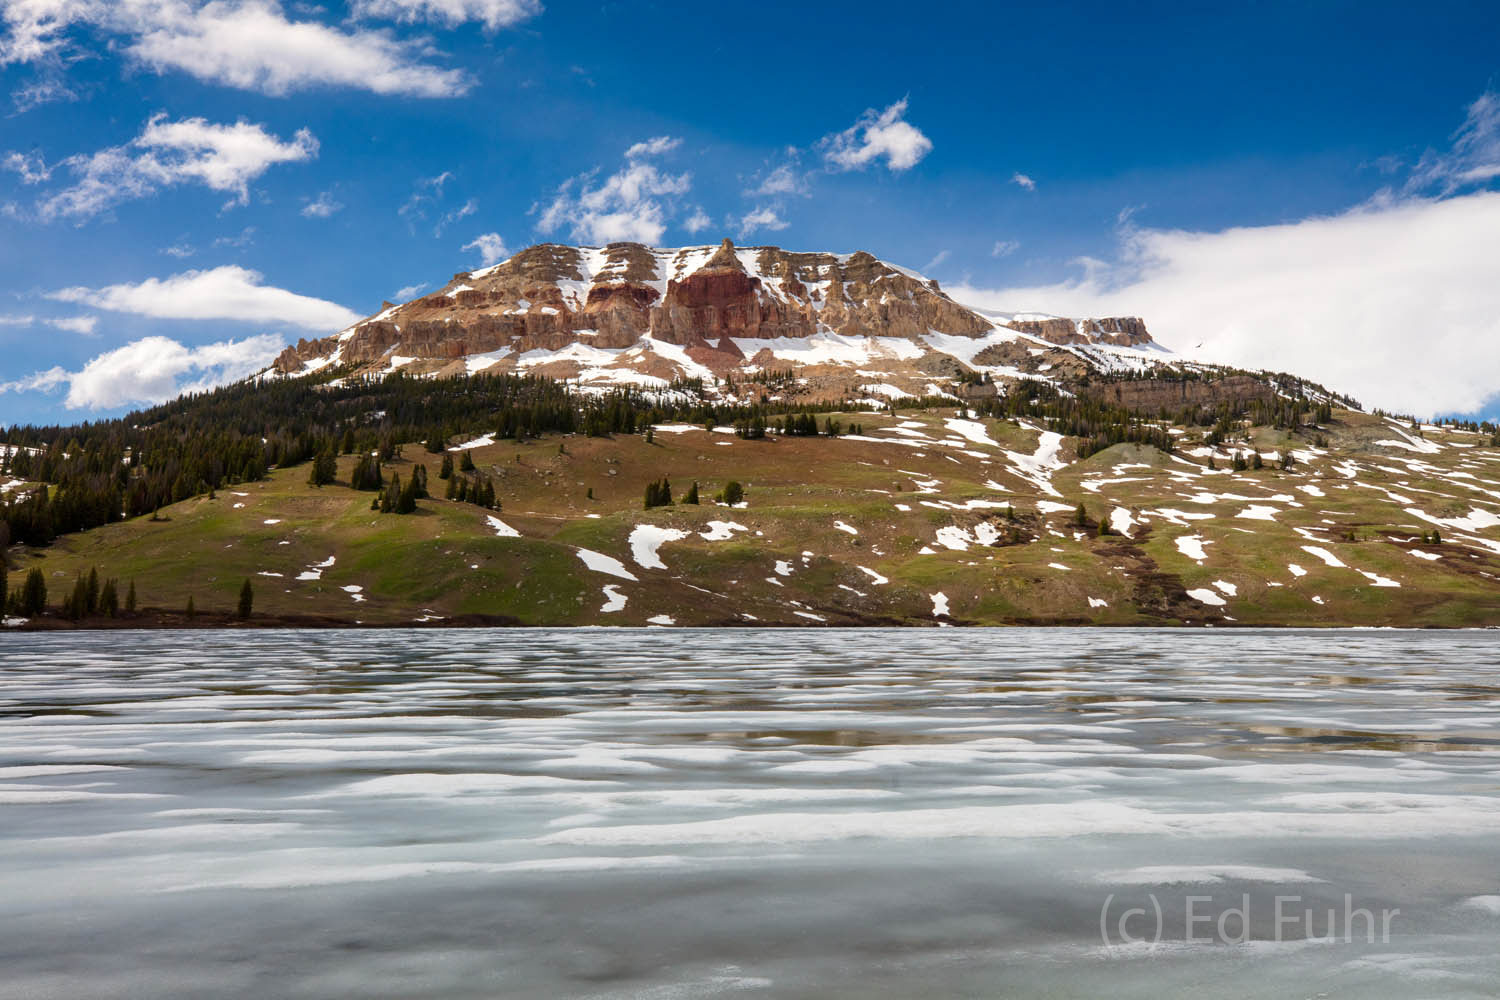 It is mid June but the lakes have not thawed along the Beartooth Highway, one of the spectacular drives in the world.